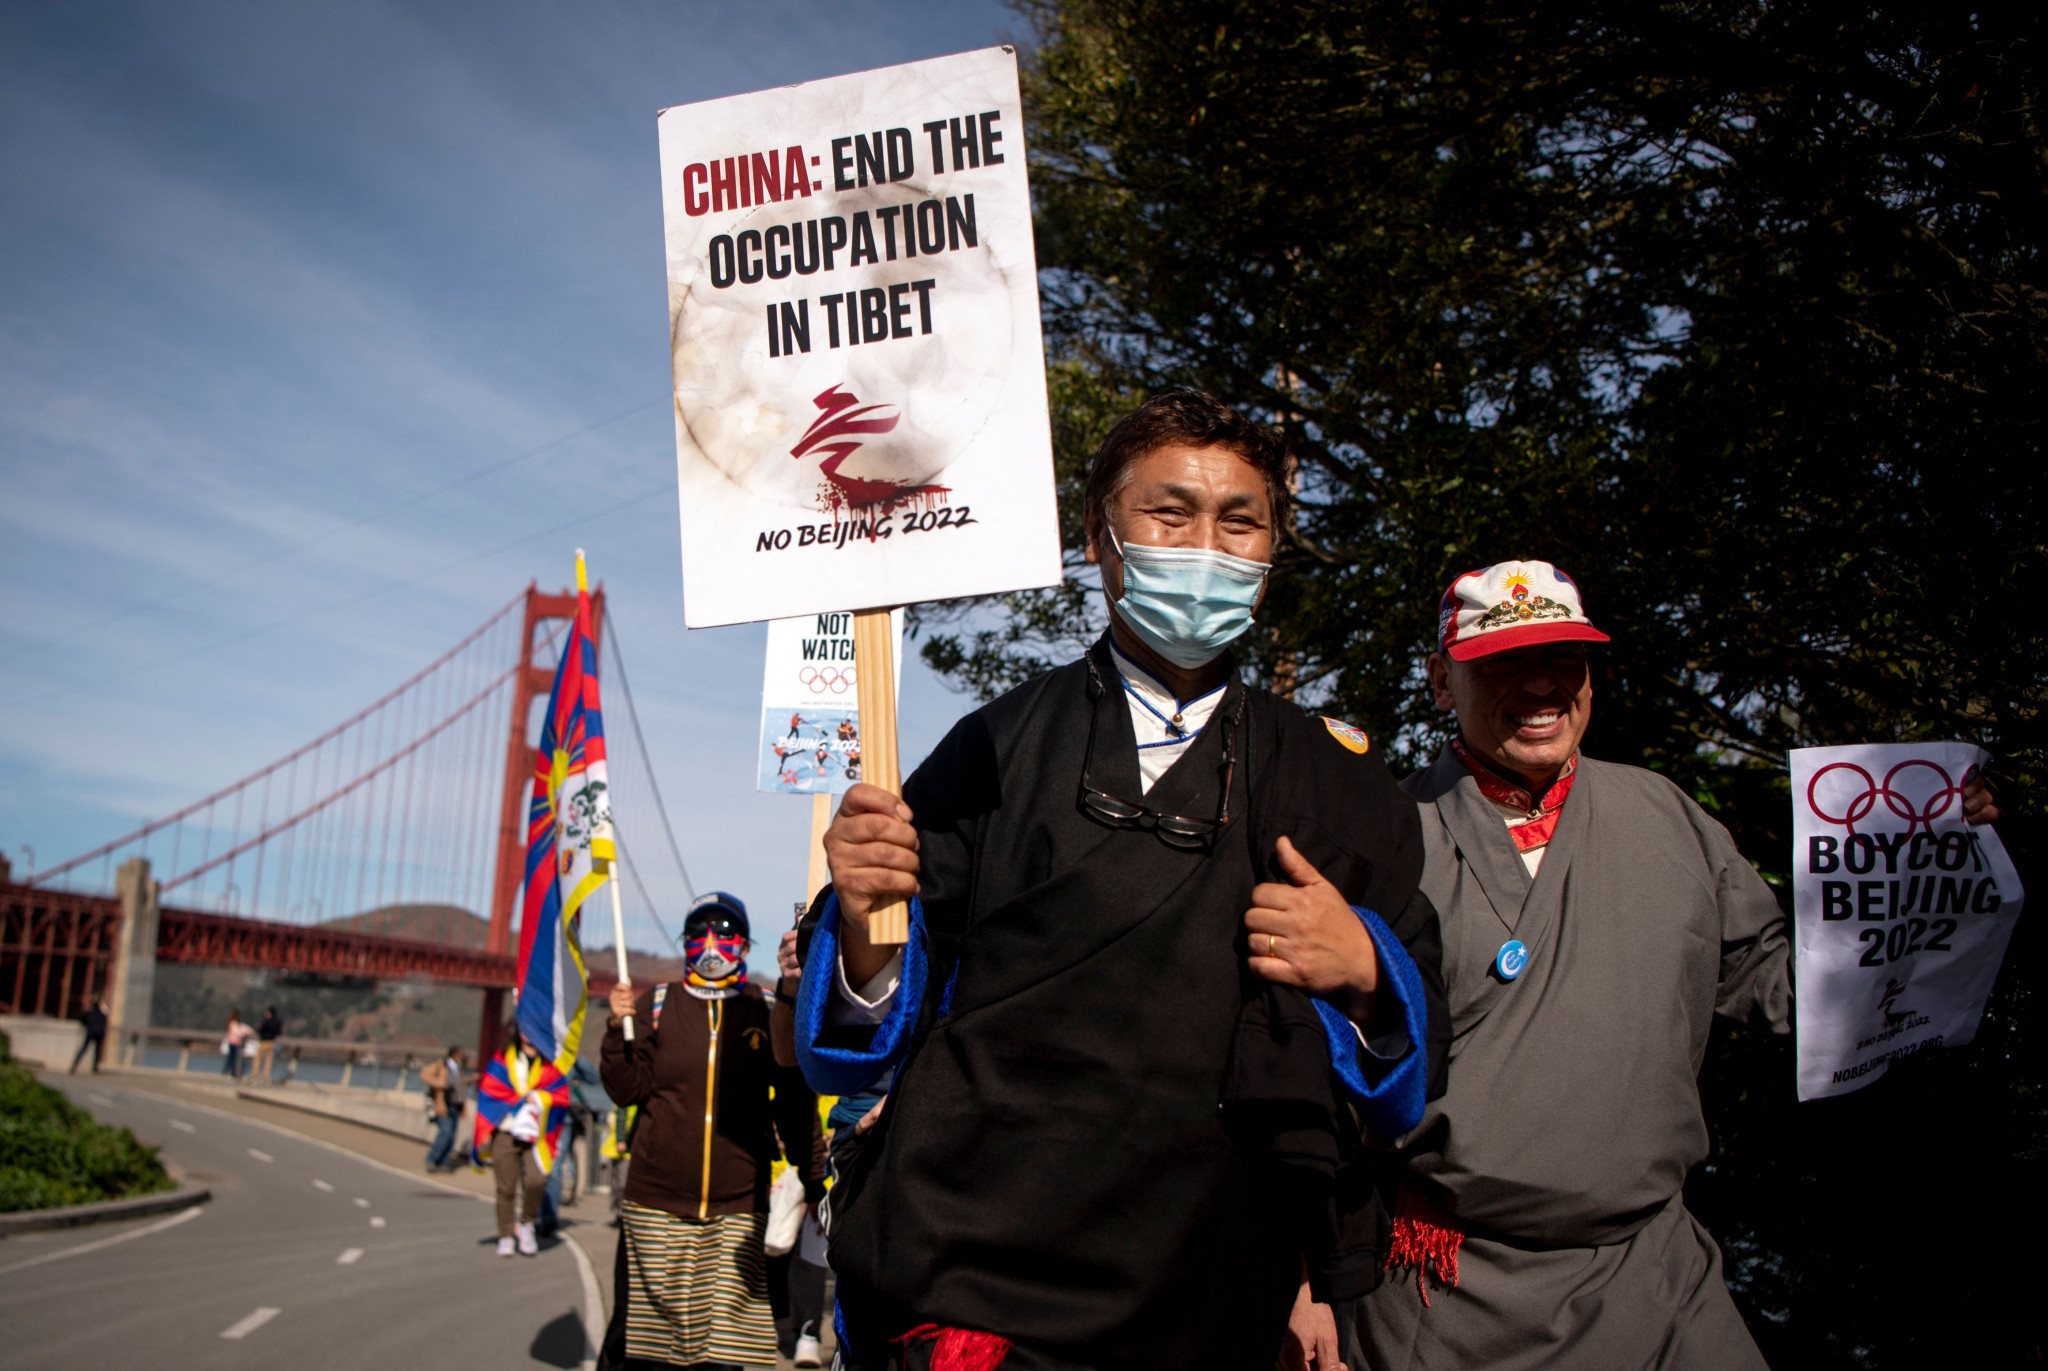 Free Tibet claims Beijing 2022 will be remembered for human rights campaigns